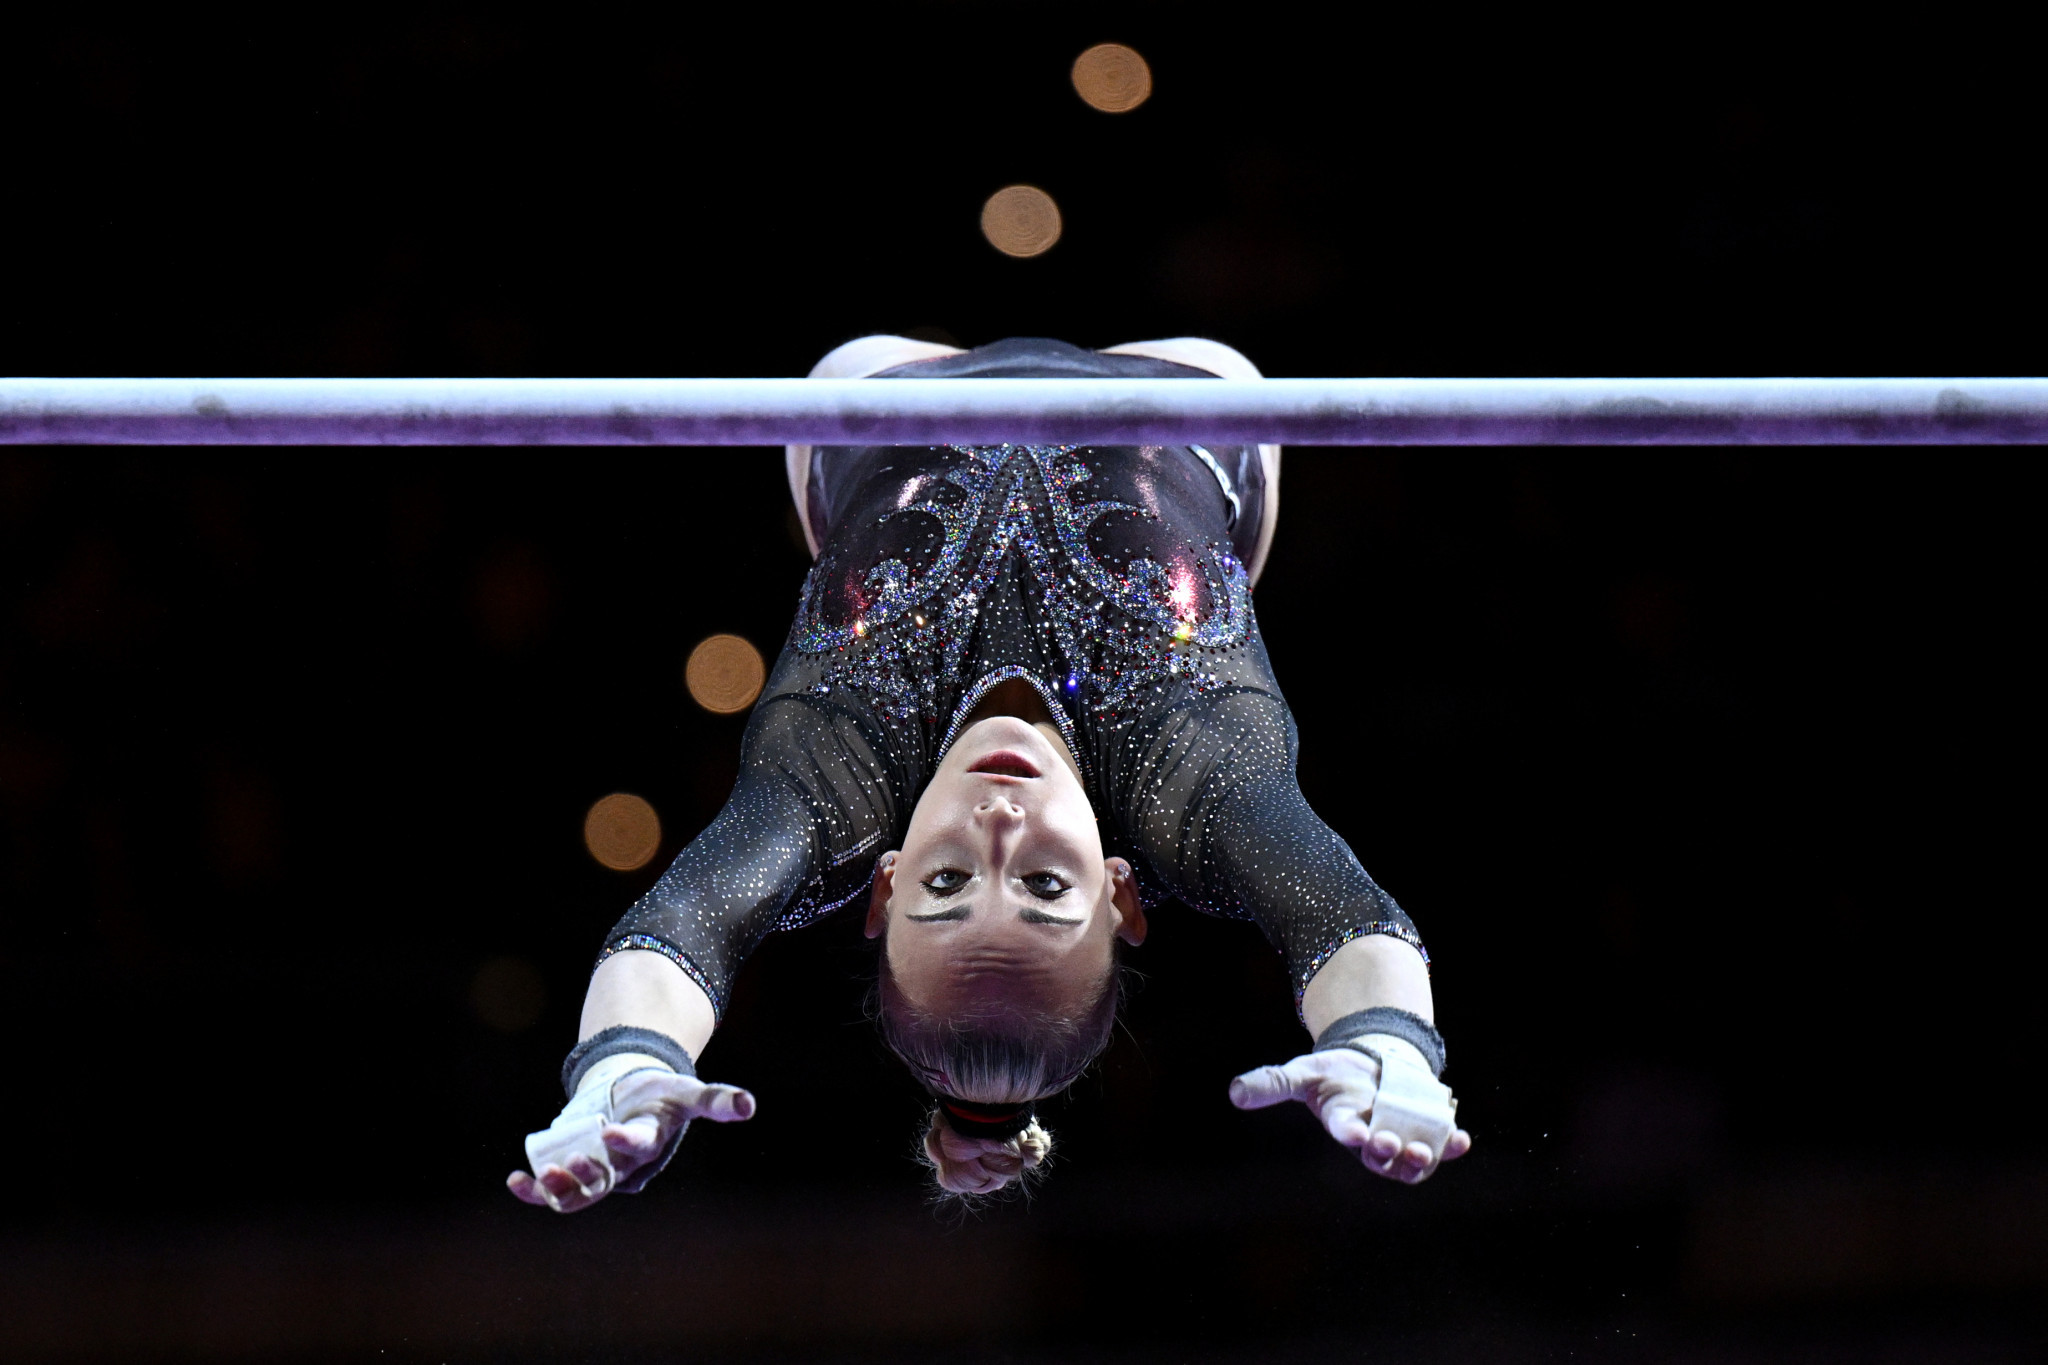 Alice D'Amato was part of the Italian team to win women's team artistic gymnastics gold at the European Championships ©Getty Images